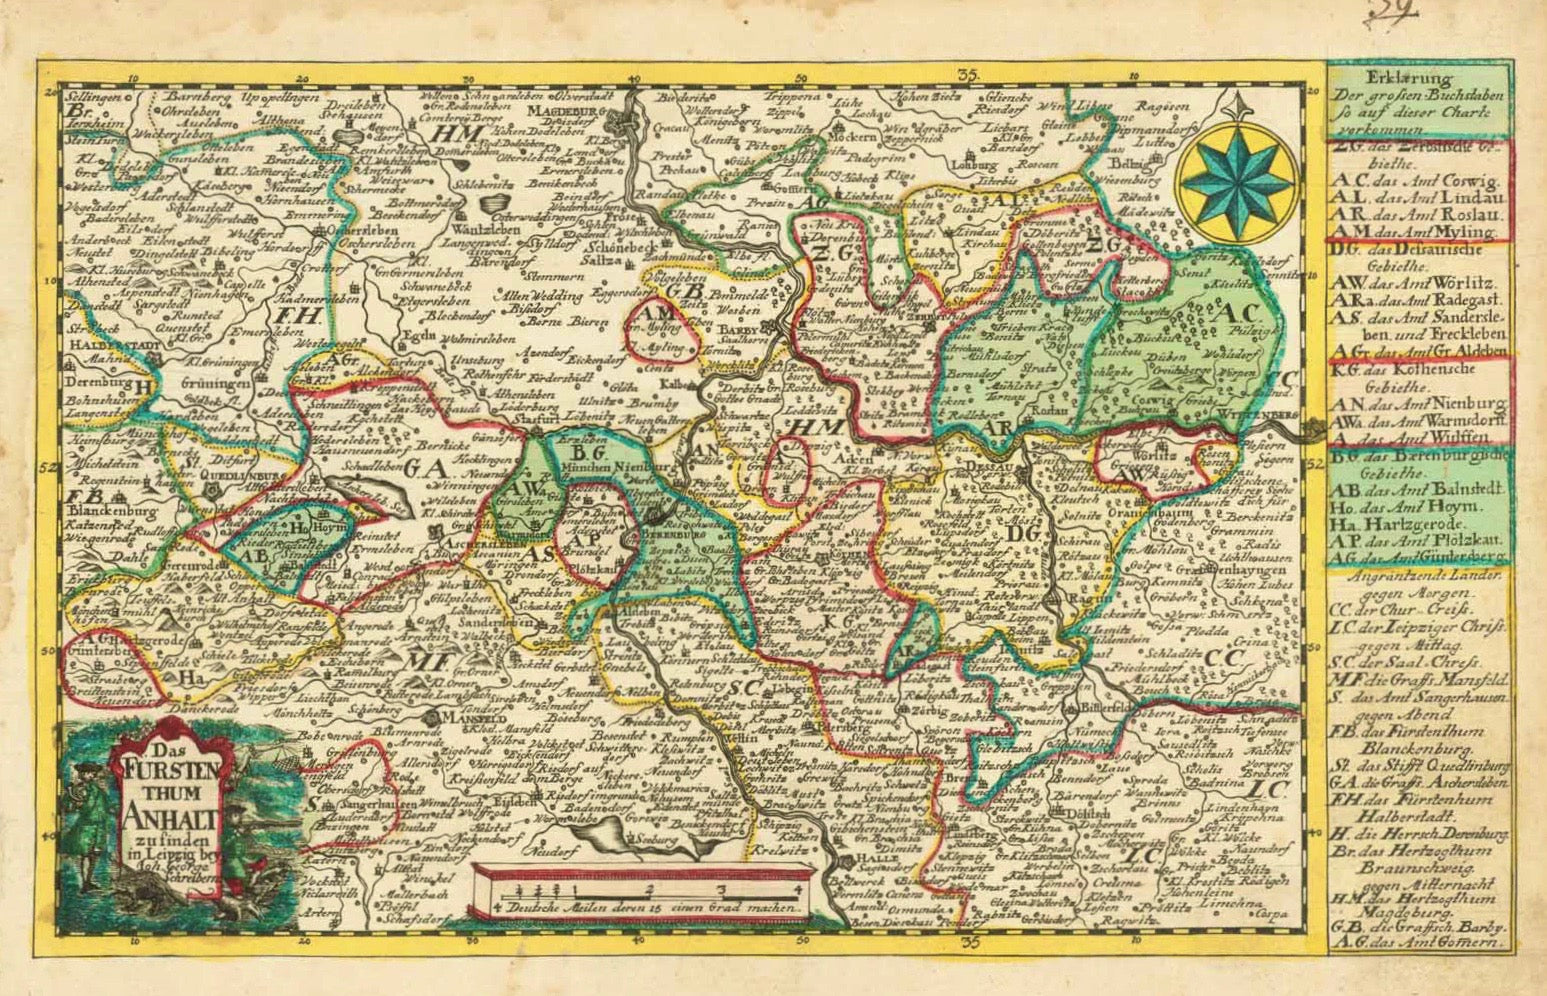 "Das Fürstenthum Anhalt". Copper etching by Johann Christian Schreibern (1676-1746). His atlas was published after his death ca. 1750 in Leipzig. Original hand coloring.  In the center of this Anhalt map is Berenburg on the Saal river. At the top in the center is Magdeburg on the Elbe river and at the bottom center is Halle on the Saal river. On the right center is Wittenberg and on the left center is Halberstadt for orientation. On the right side is map description.